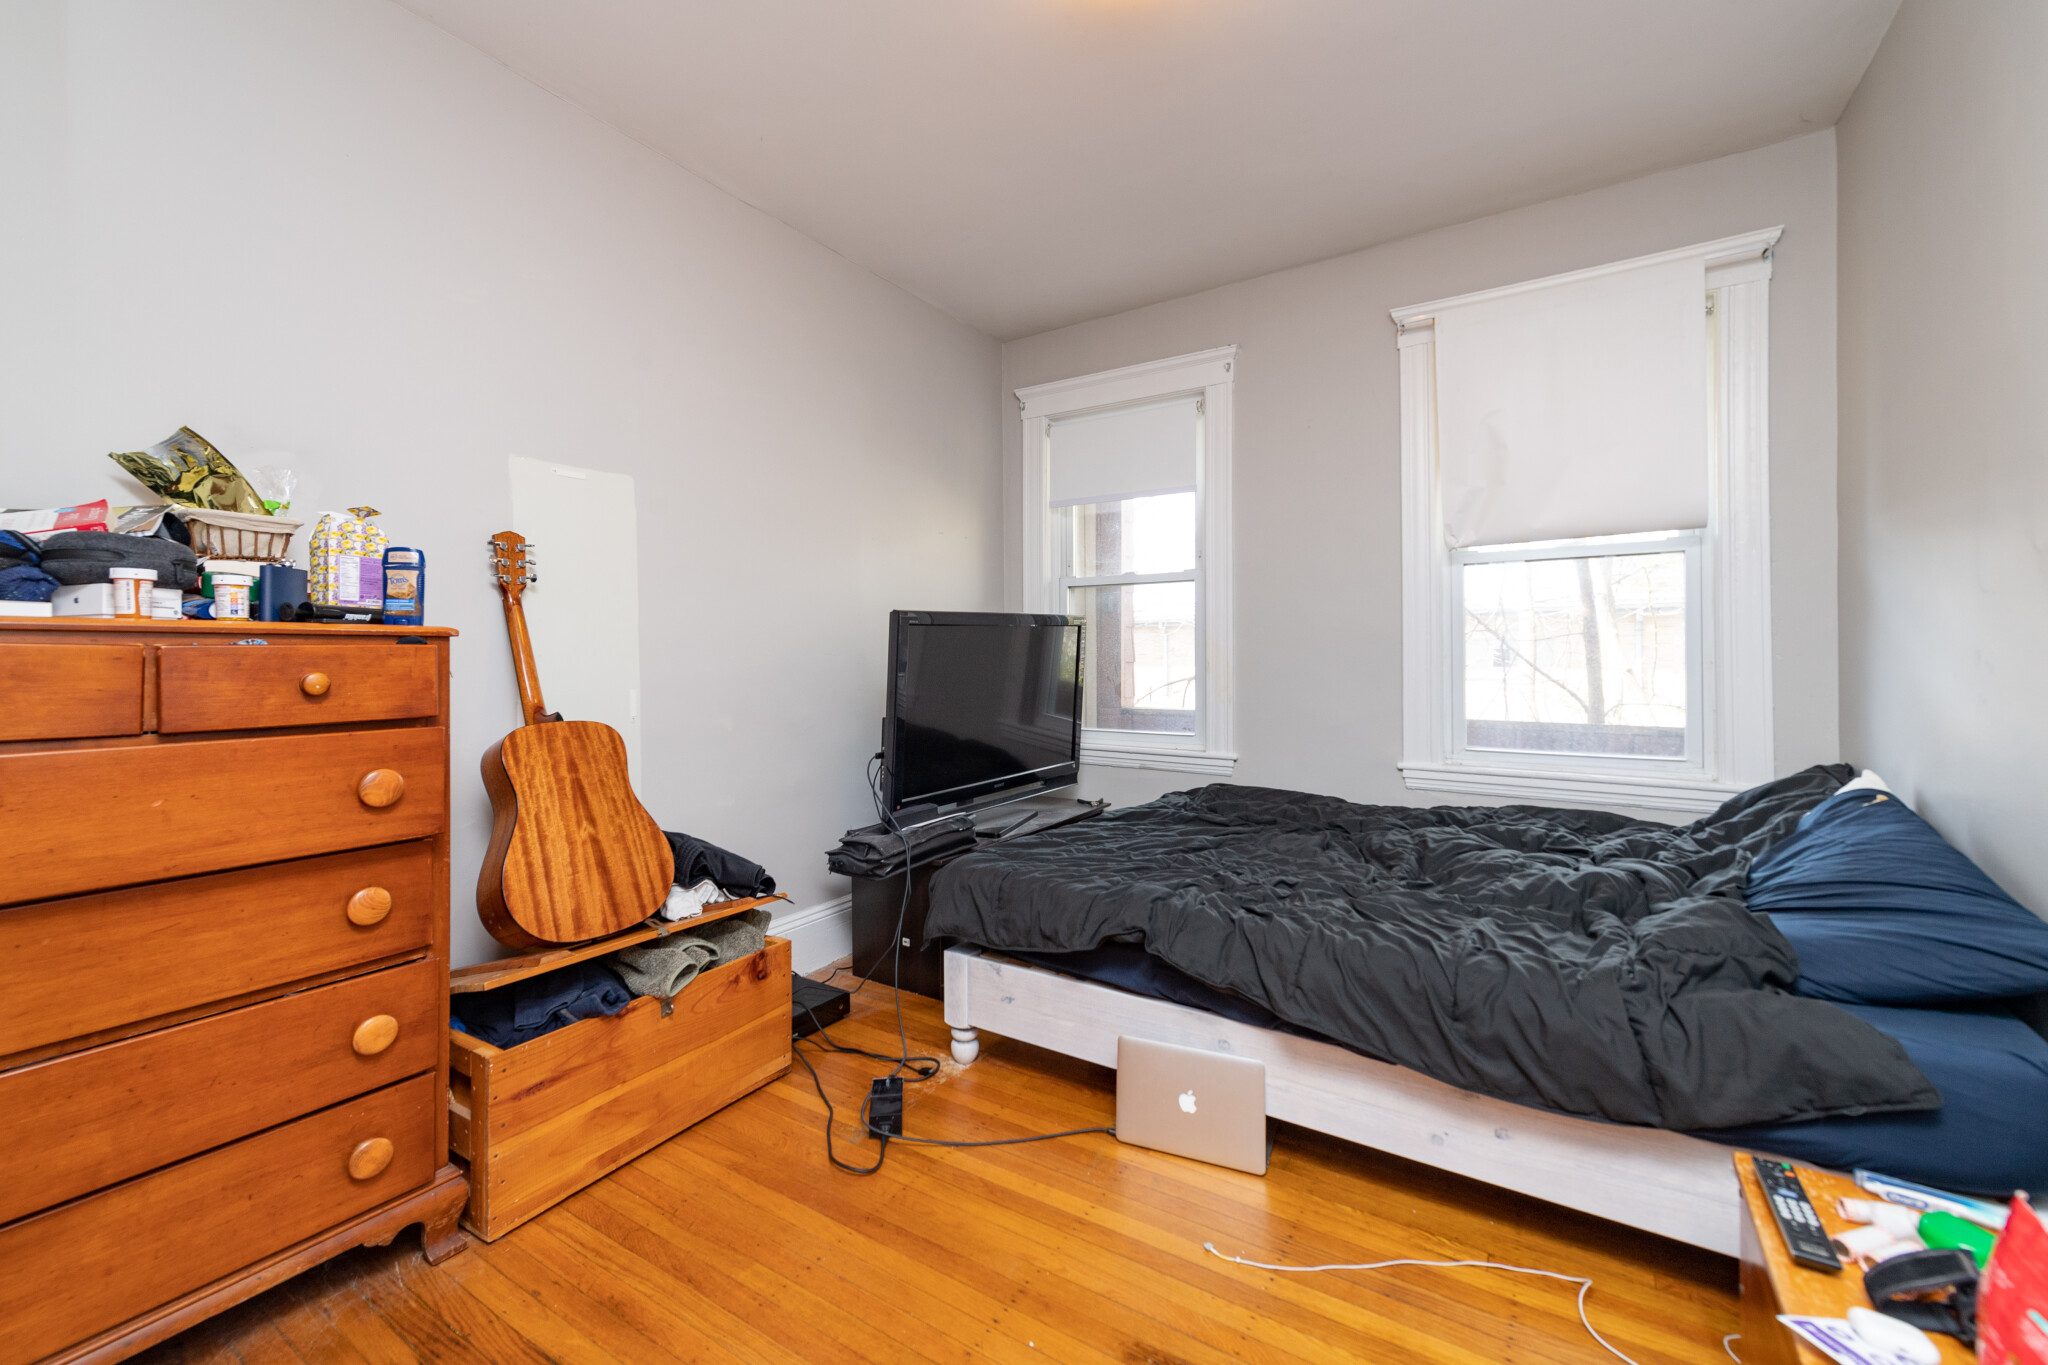 Photos of apartment on Belmont St (s),Somerville MA 02143